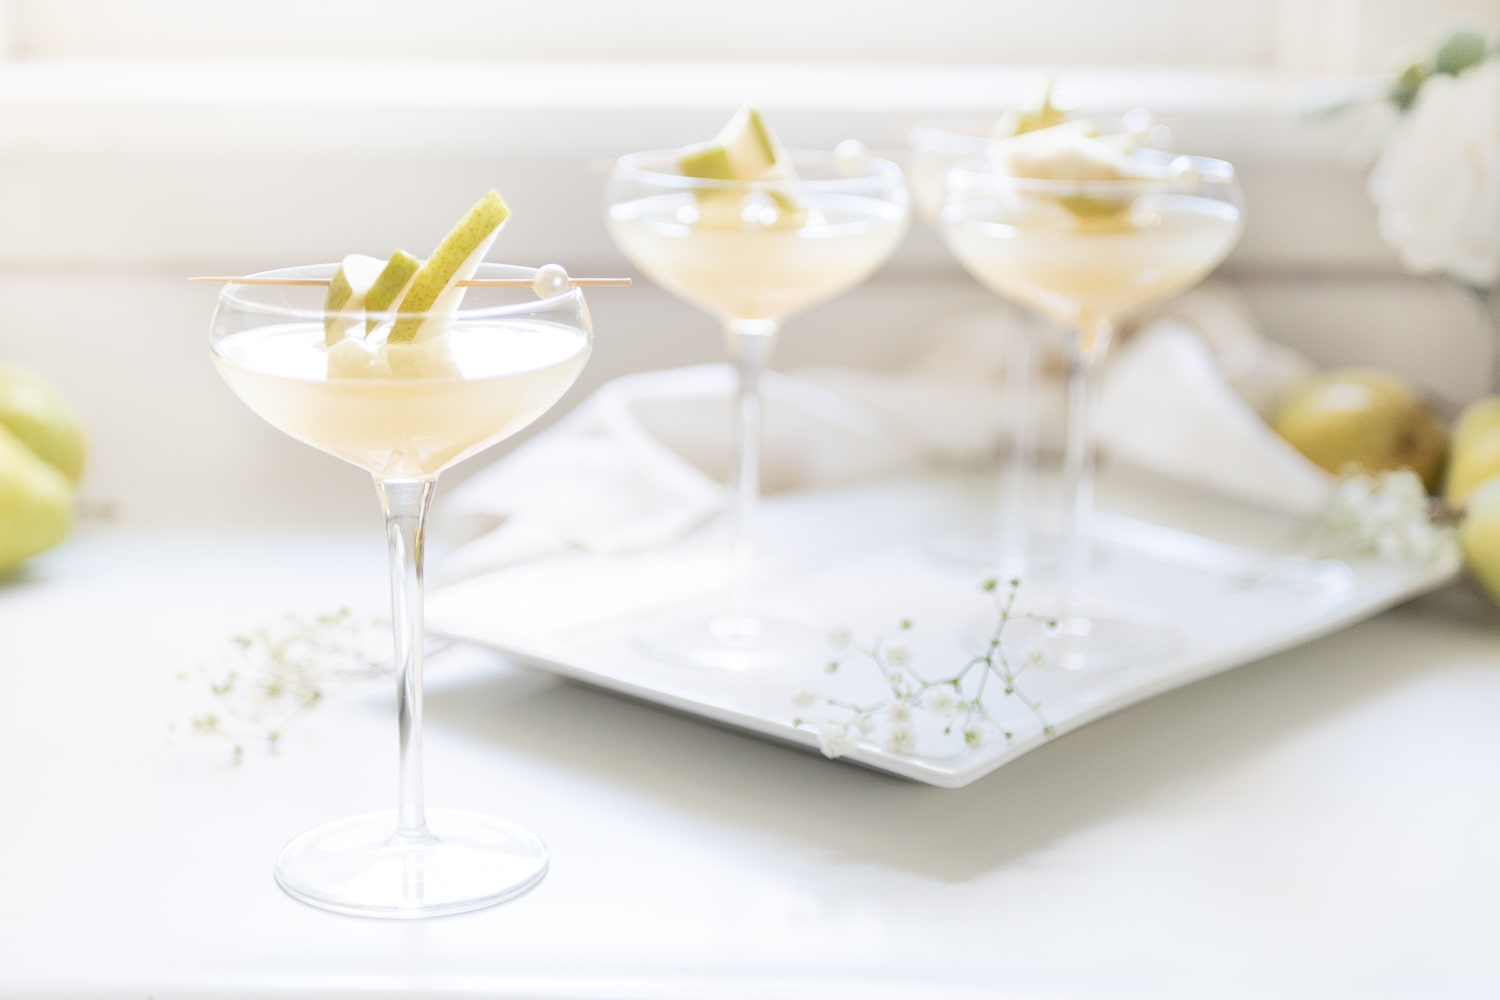 Blogger Stephanie Ziajka shares one of her favorite cocktails with pear nectar on Diary of a Debutante